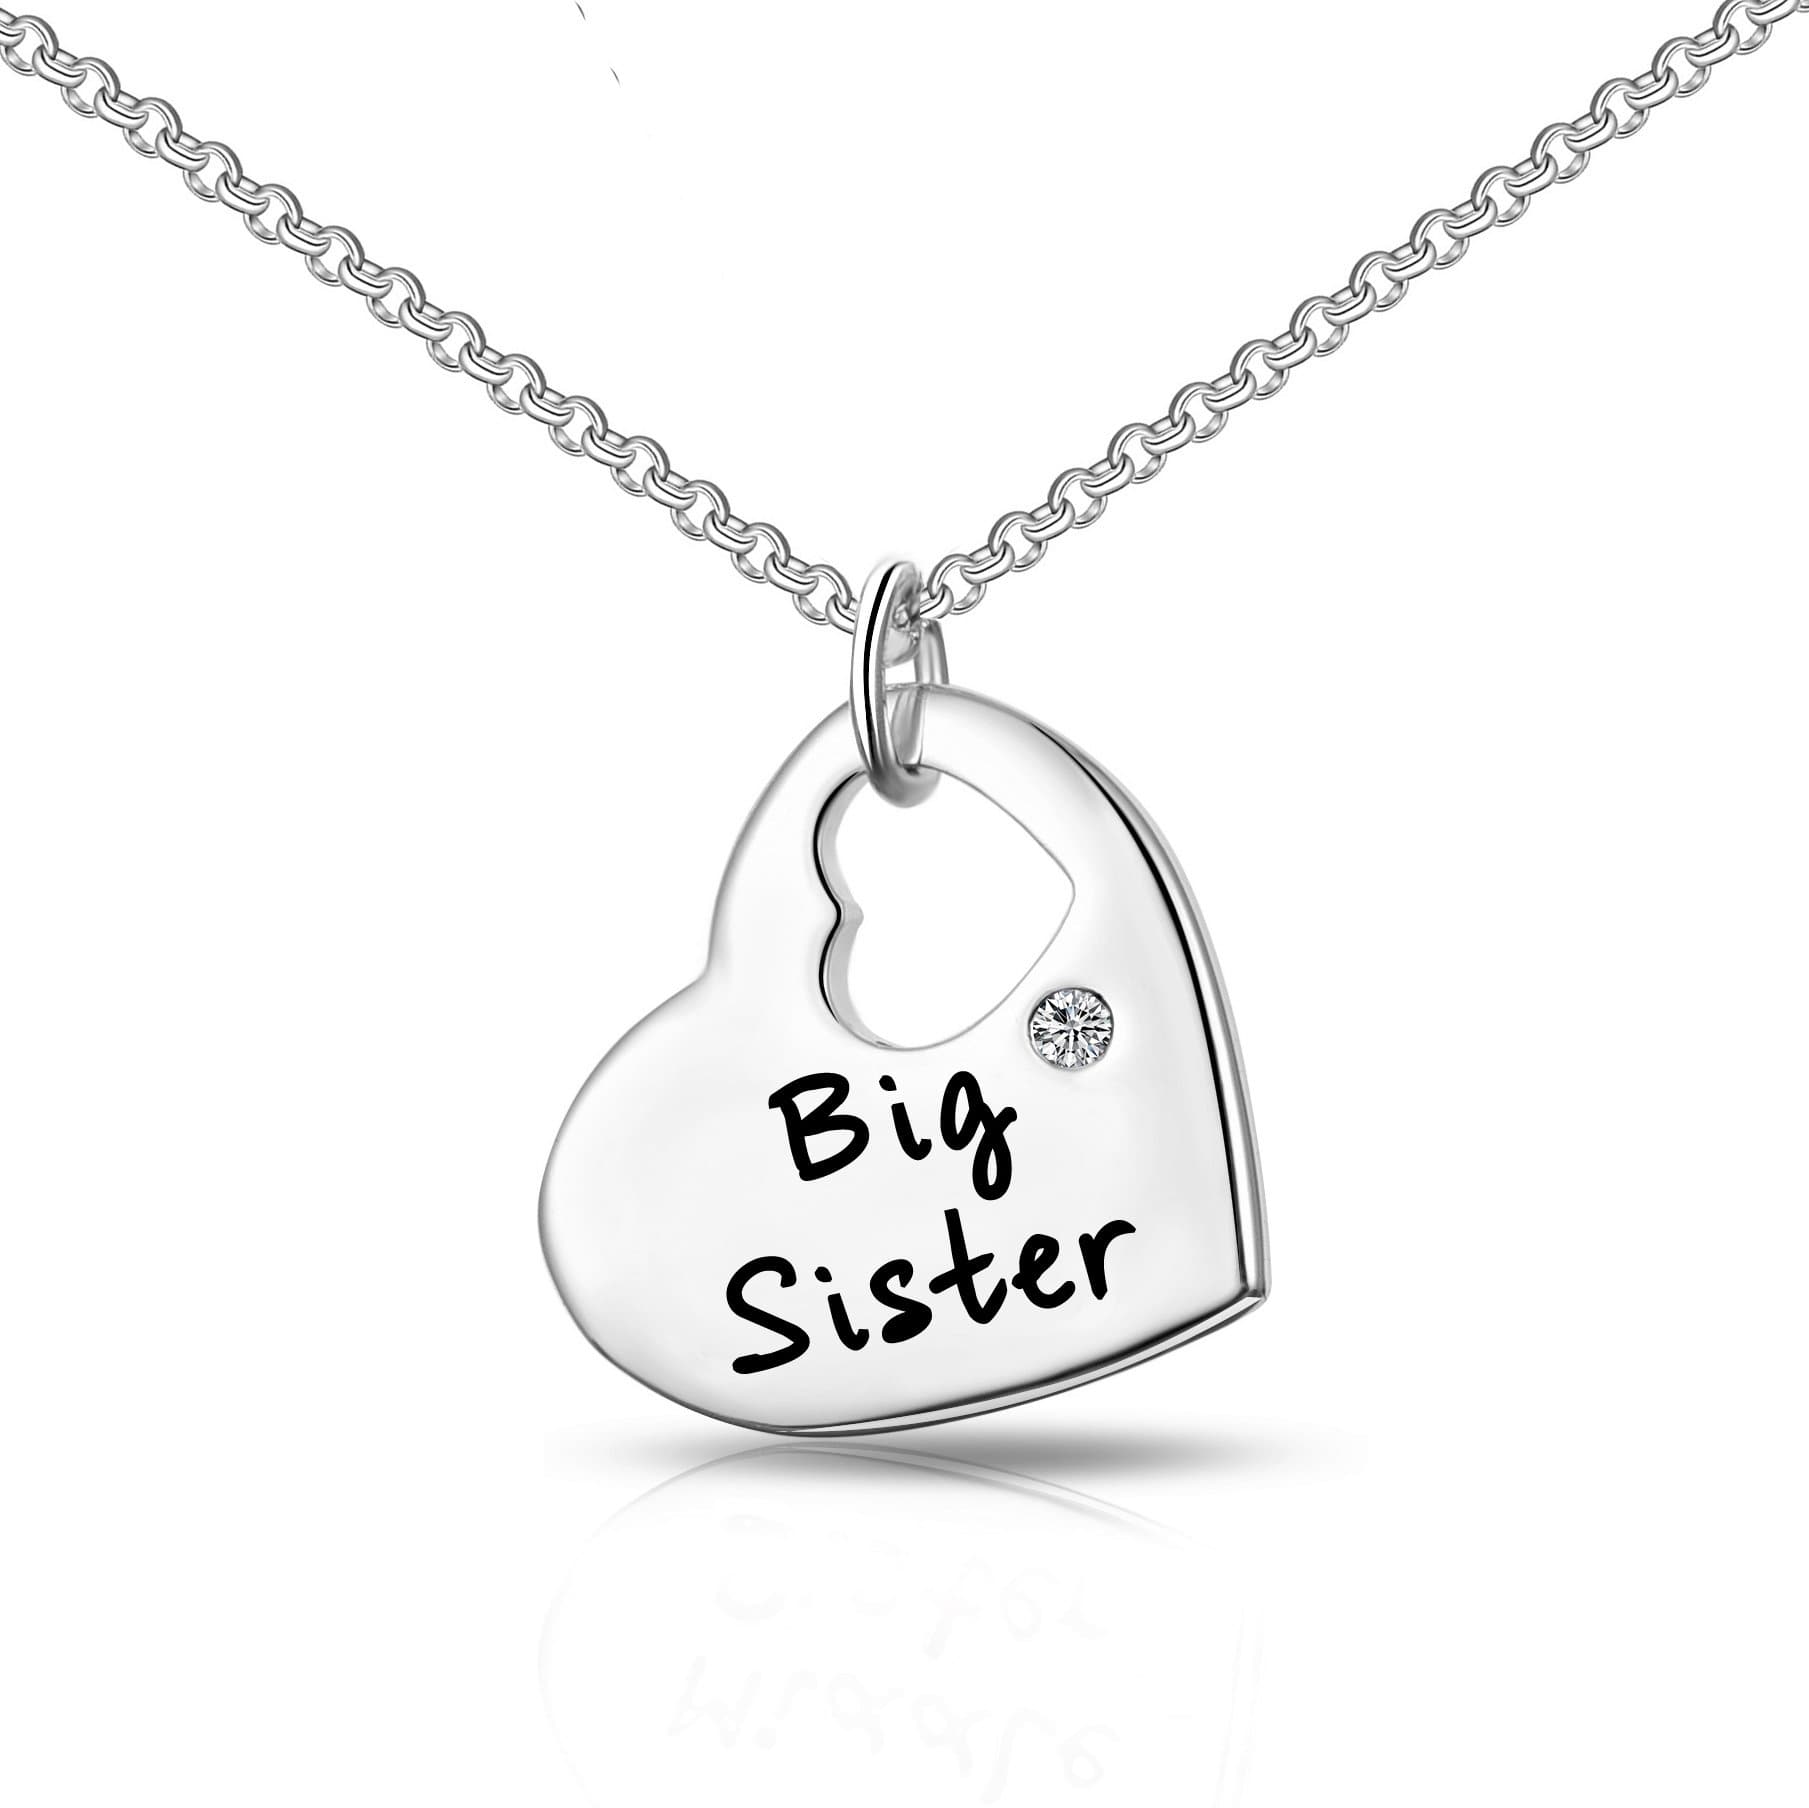 Sister Necklace Sterling Silver Jewelry Gifts for Women – Unique Fun Gift